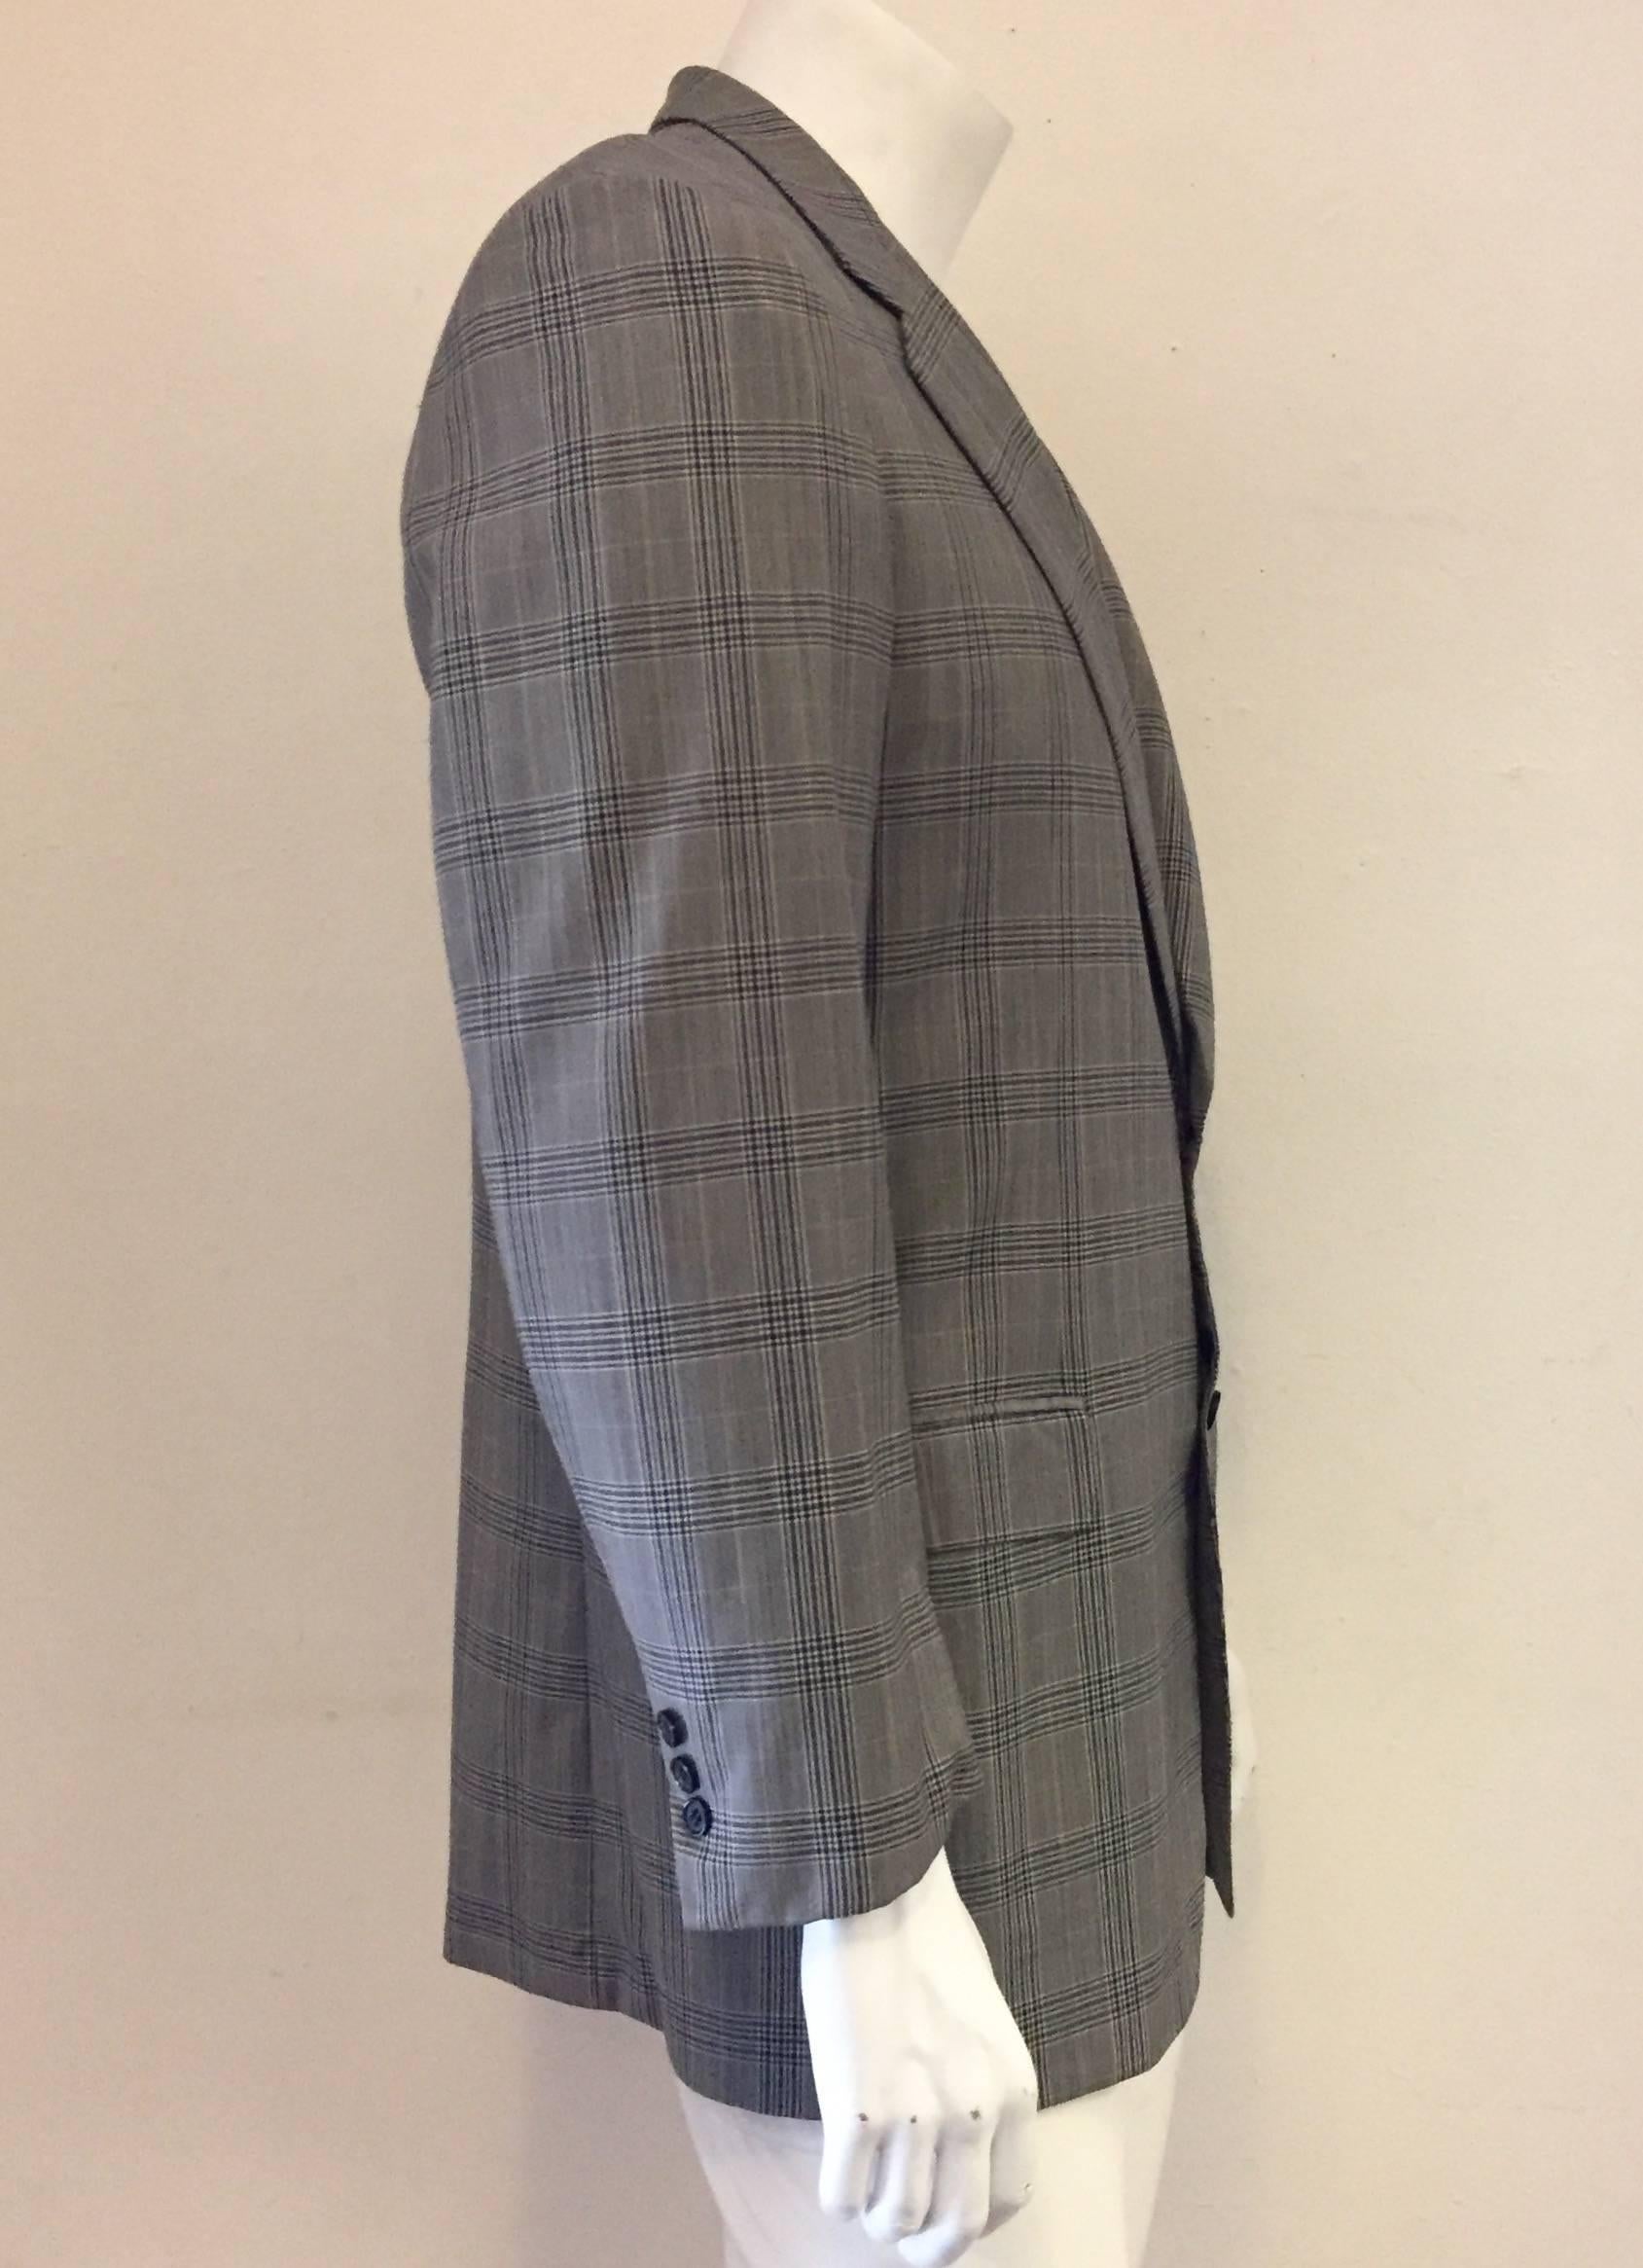 This jacket has notched lapels and two-button front closure.  Elegantly assembled with 2 flap pockets and a chest welt pocket.  Single vent back in a windowpane check 100% Wool cloth.  This sport coat bears the heritage of the Brioni House